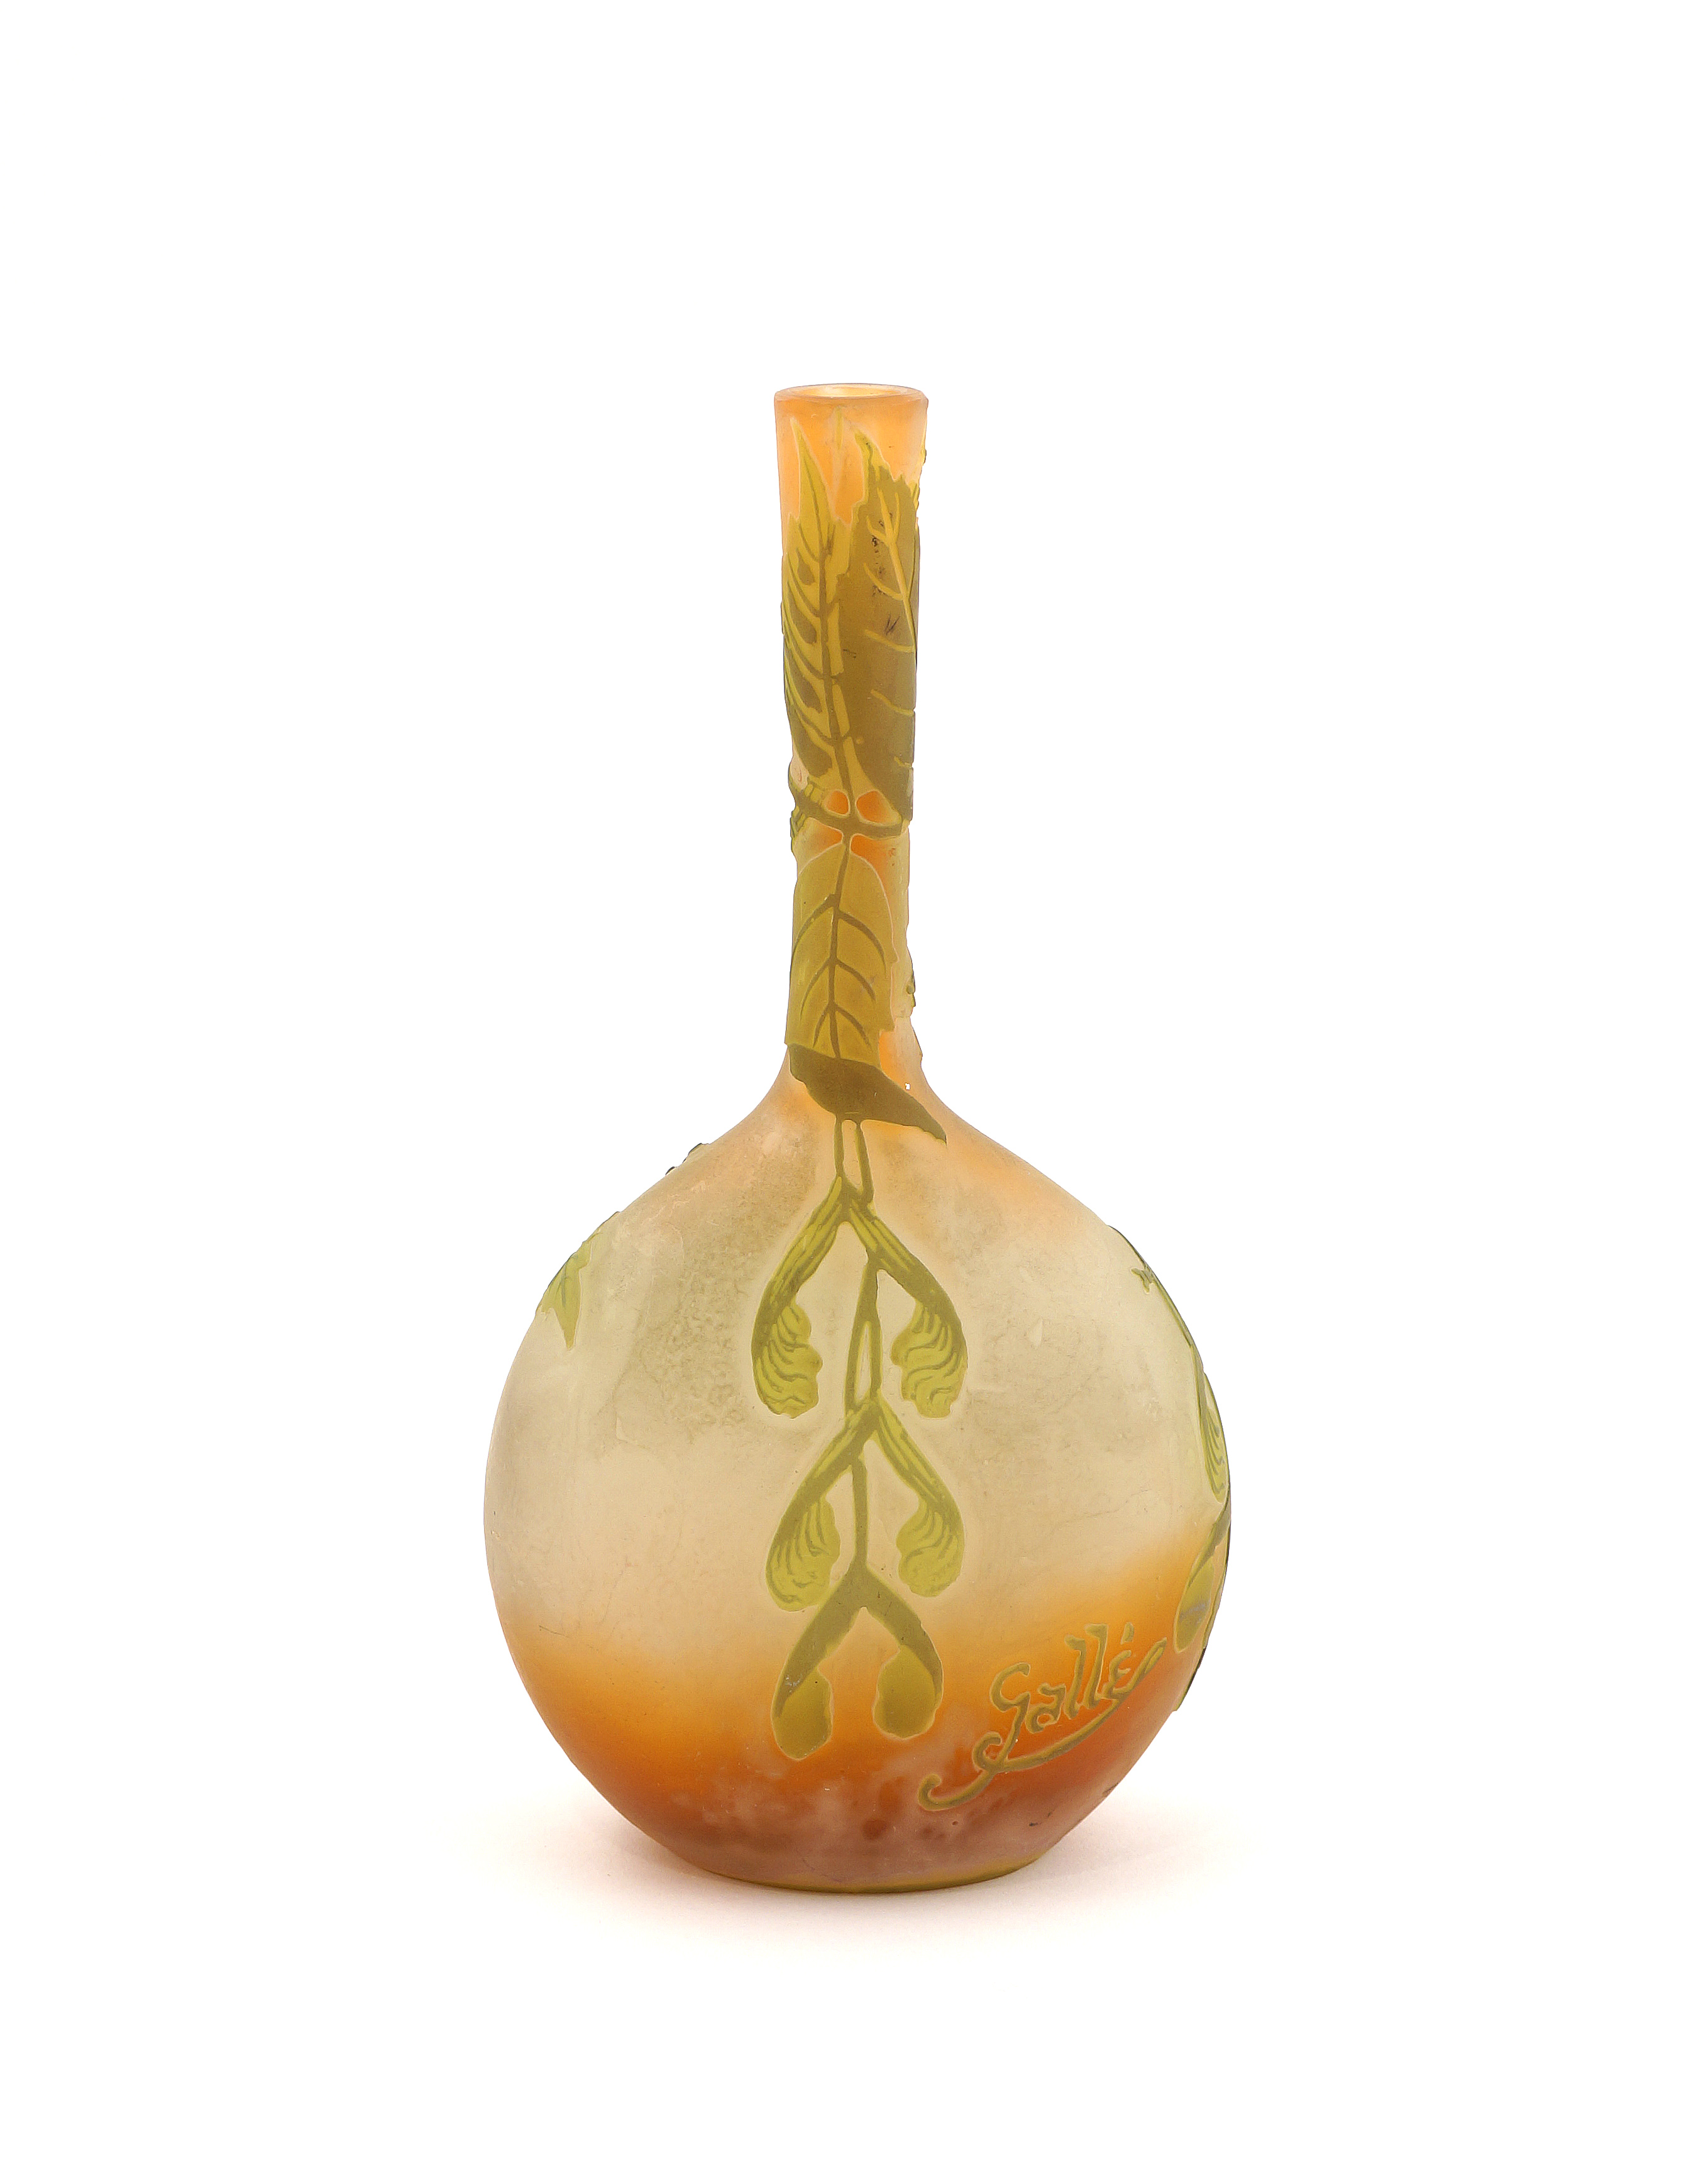 Emille Galle' A small cameo glass vase, signed Nancy, 1846-1904 h. 16,5 cm. - Image 2 of 2